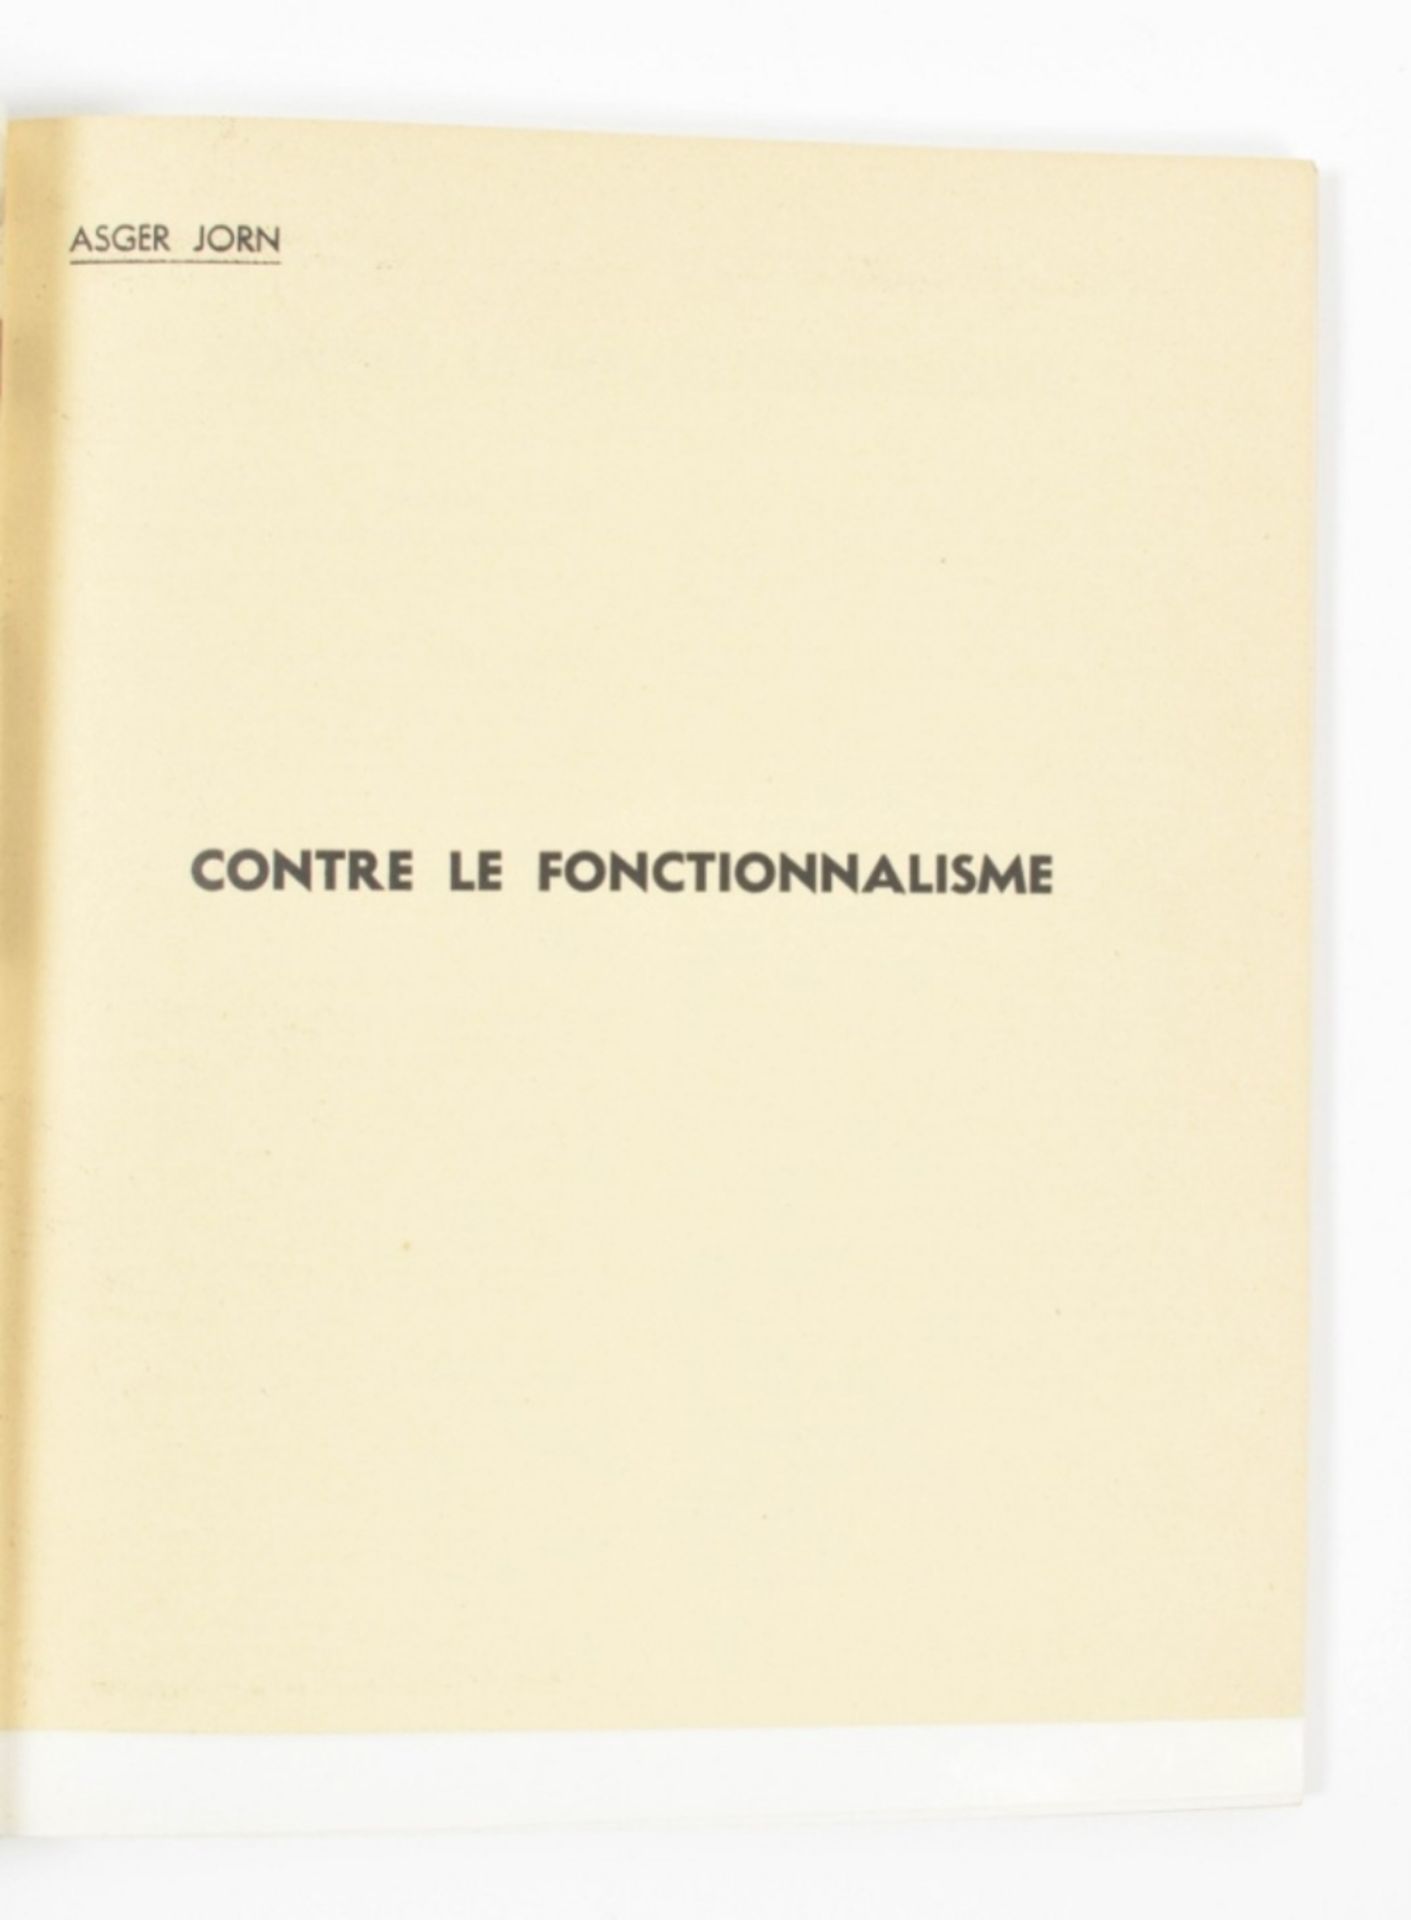 [Situationists] Asger Jorn, Pour la Forme  - Image 2 of 6